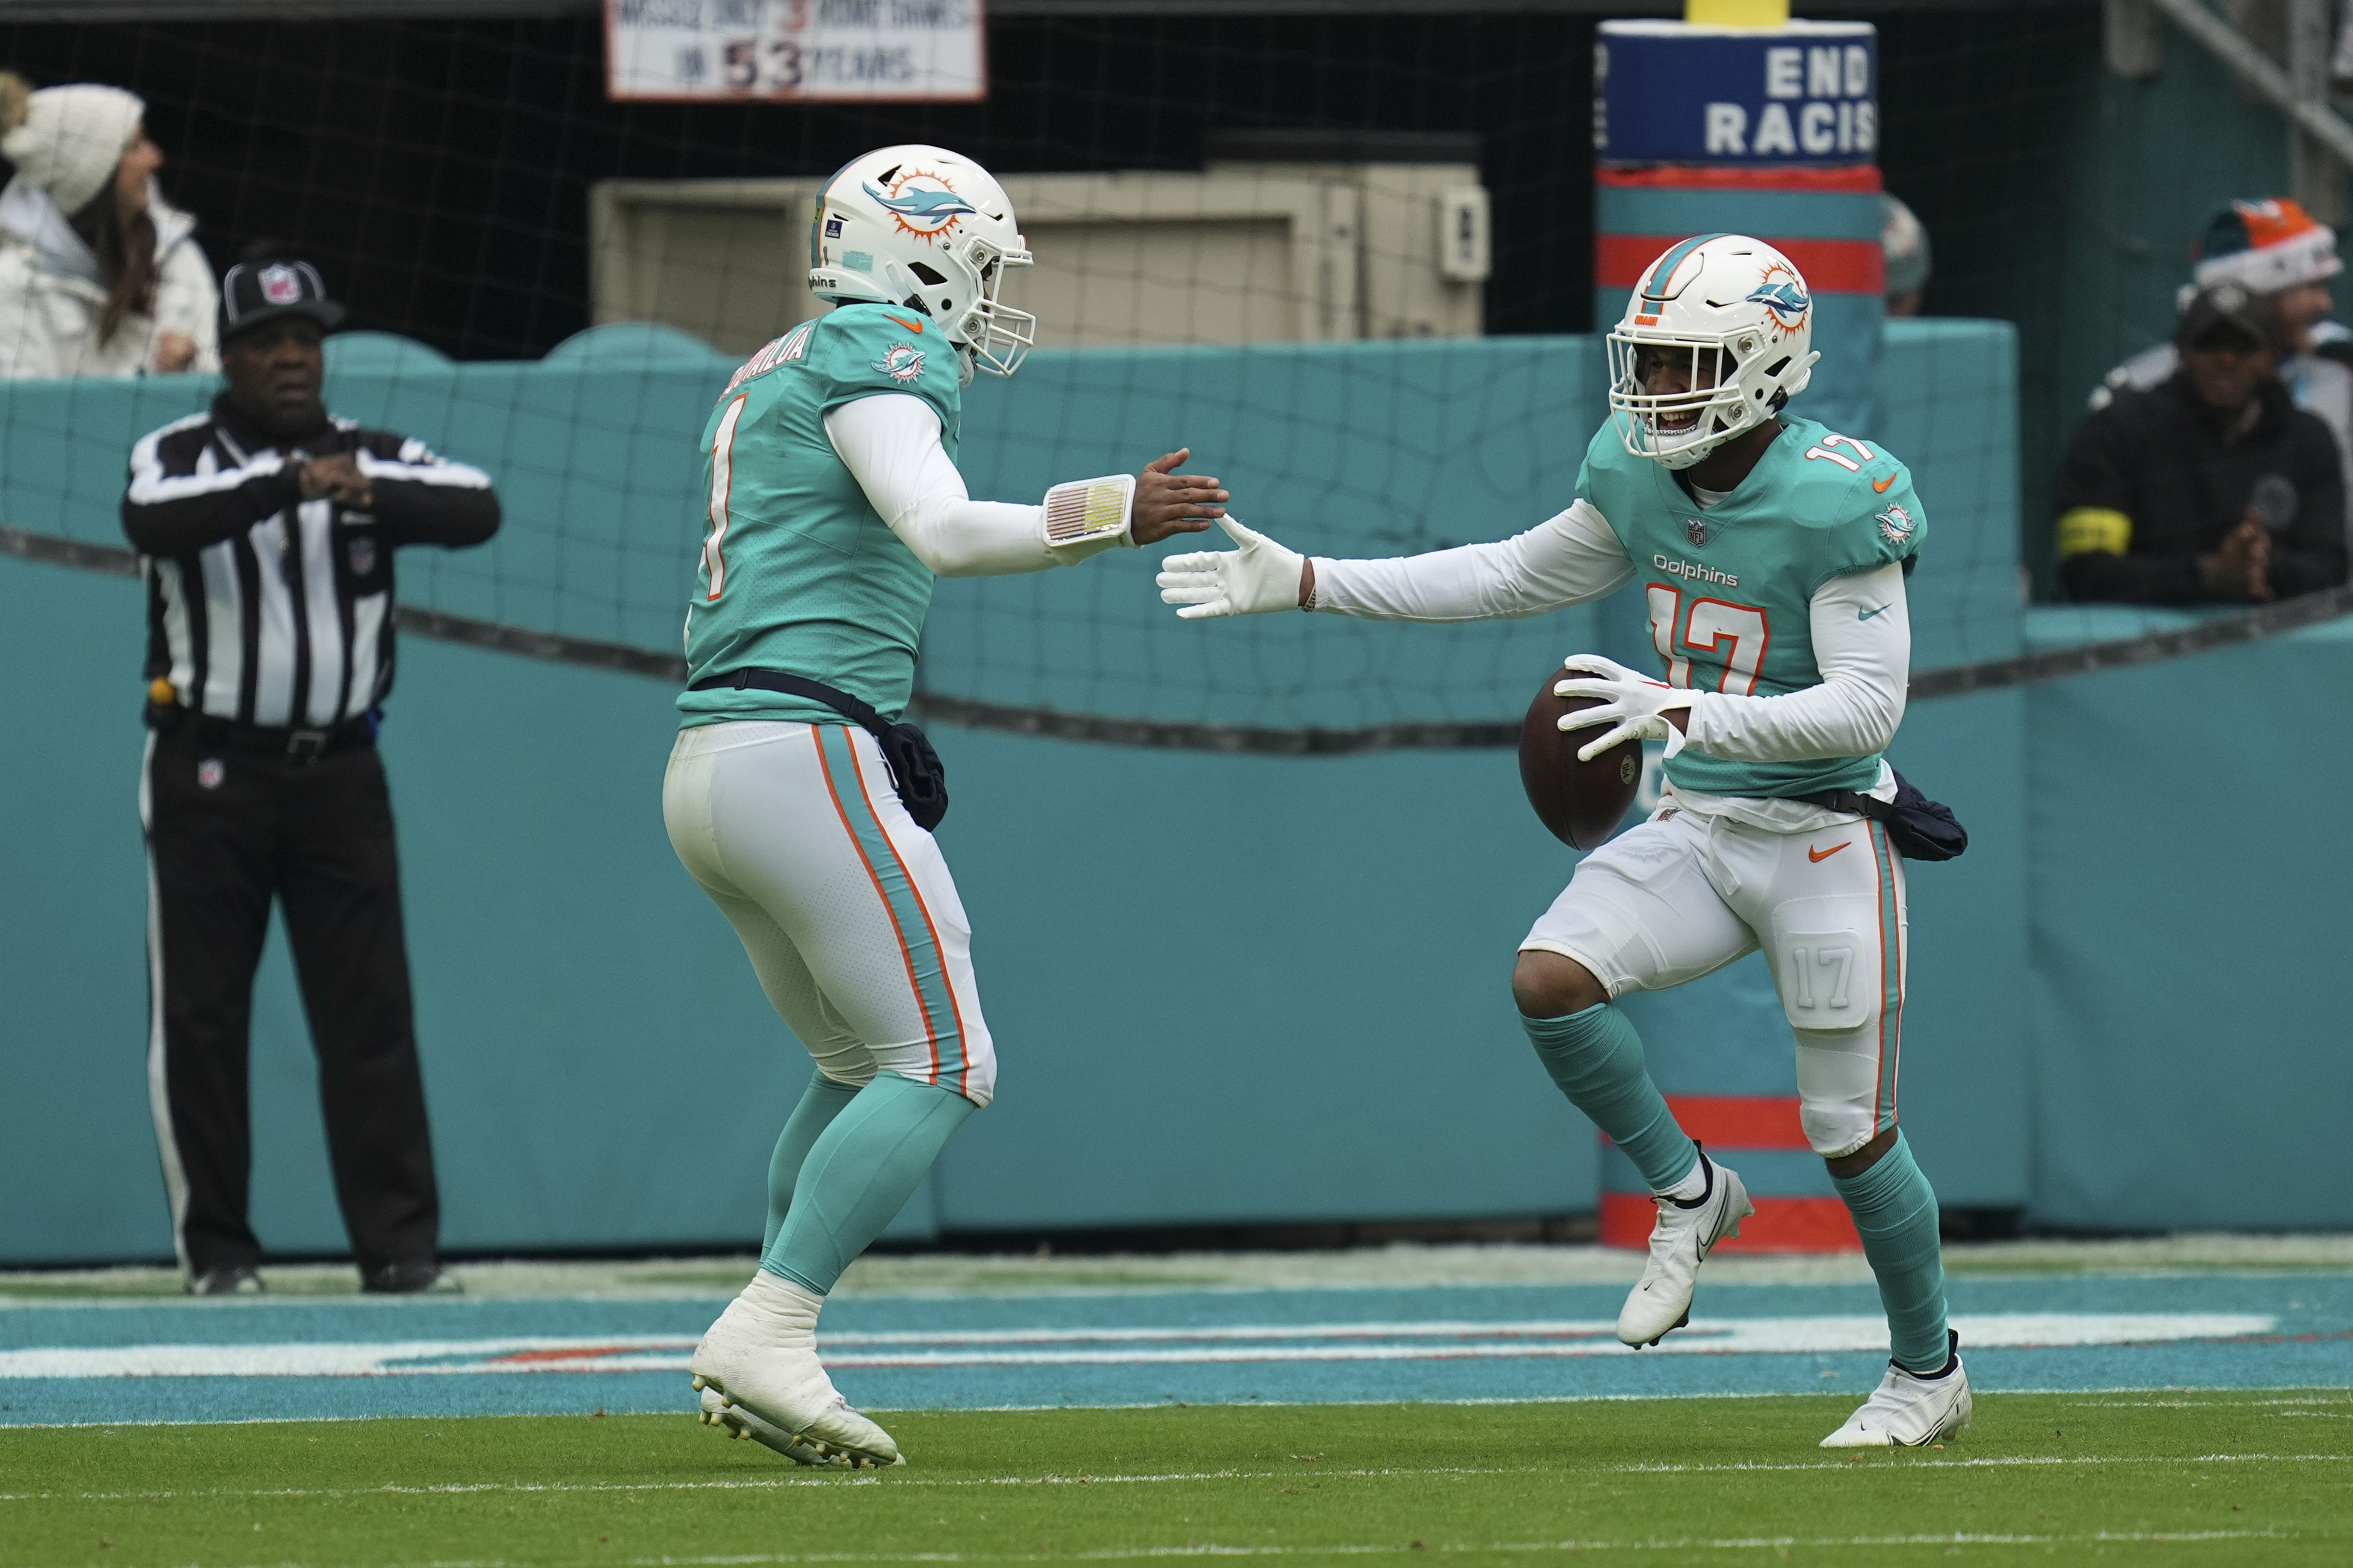 NFL on FOX - Fins Up! The Miami Dolphins clinch a spot in the